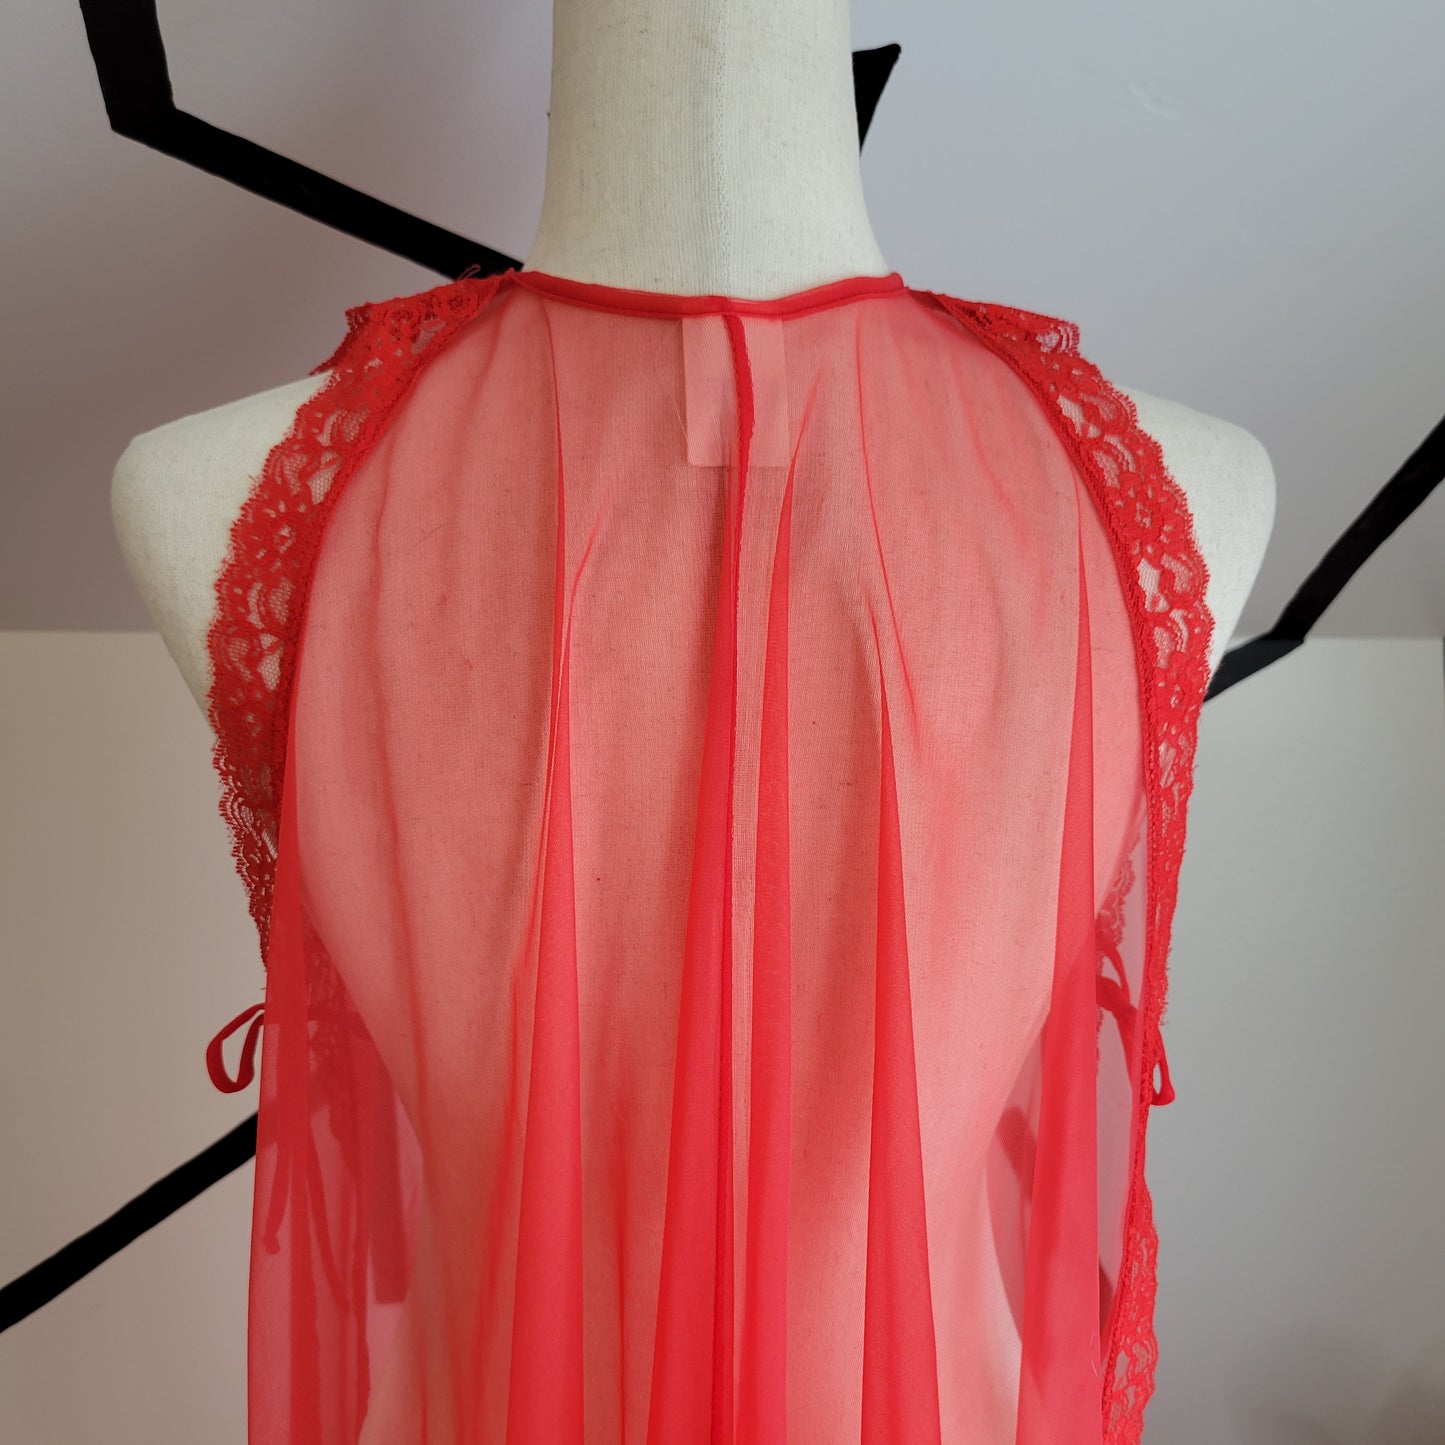 Frederick's of Hollywood Sheer Nylon Red Open Side Dress - OS